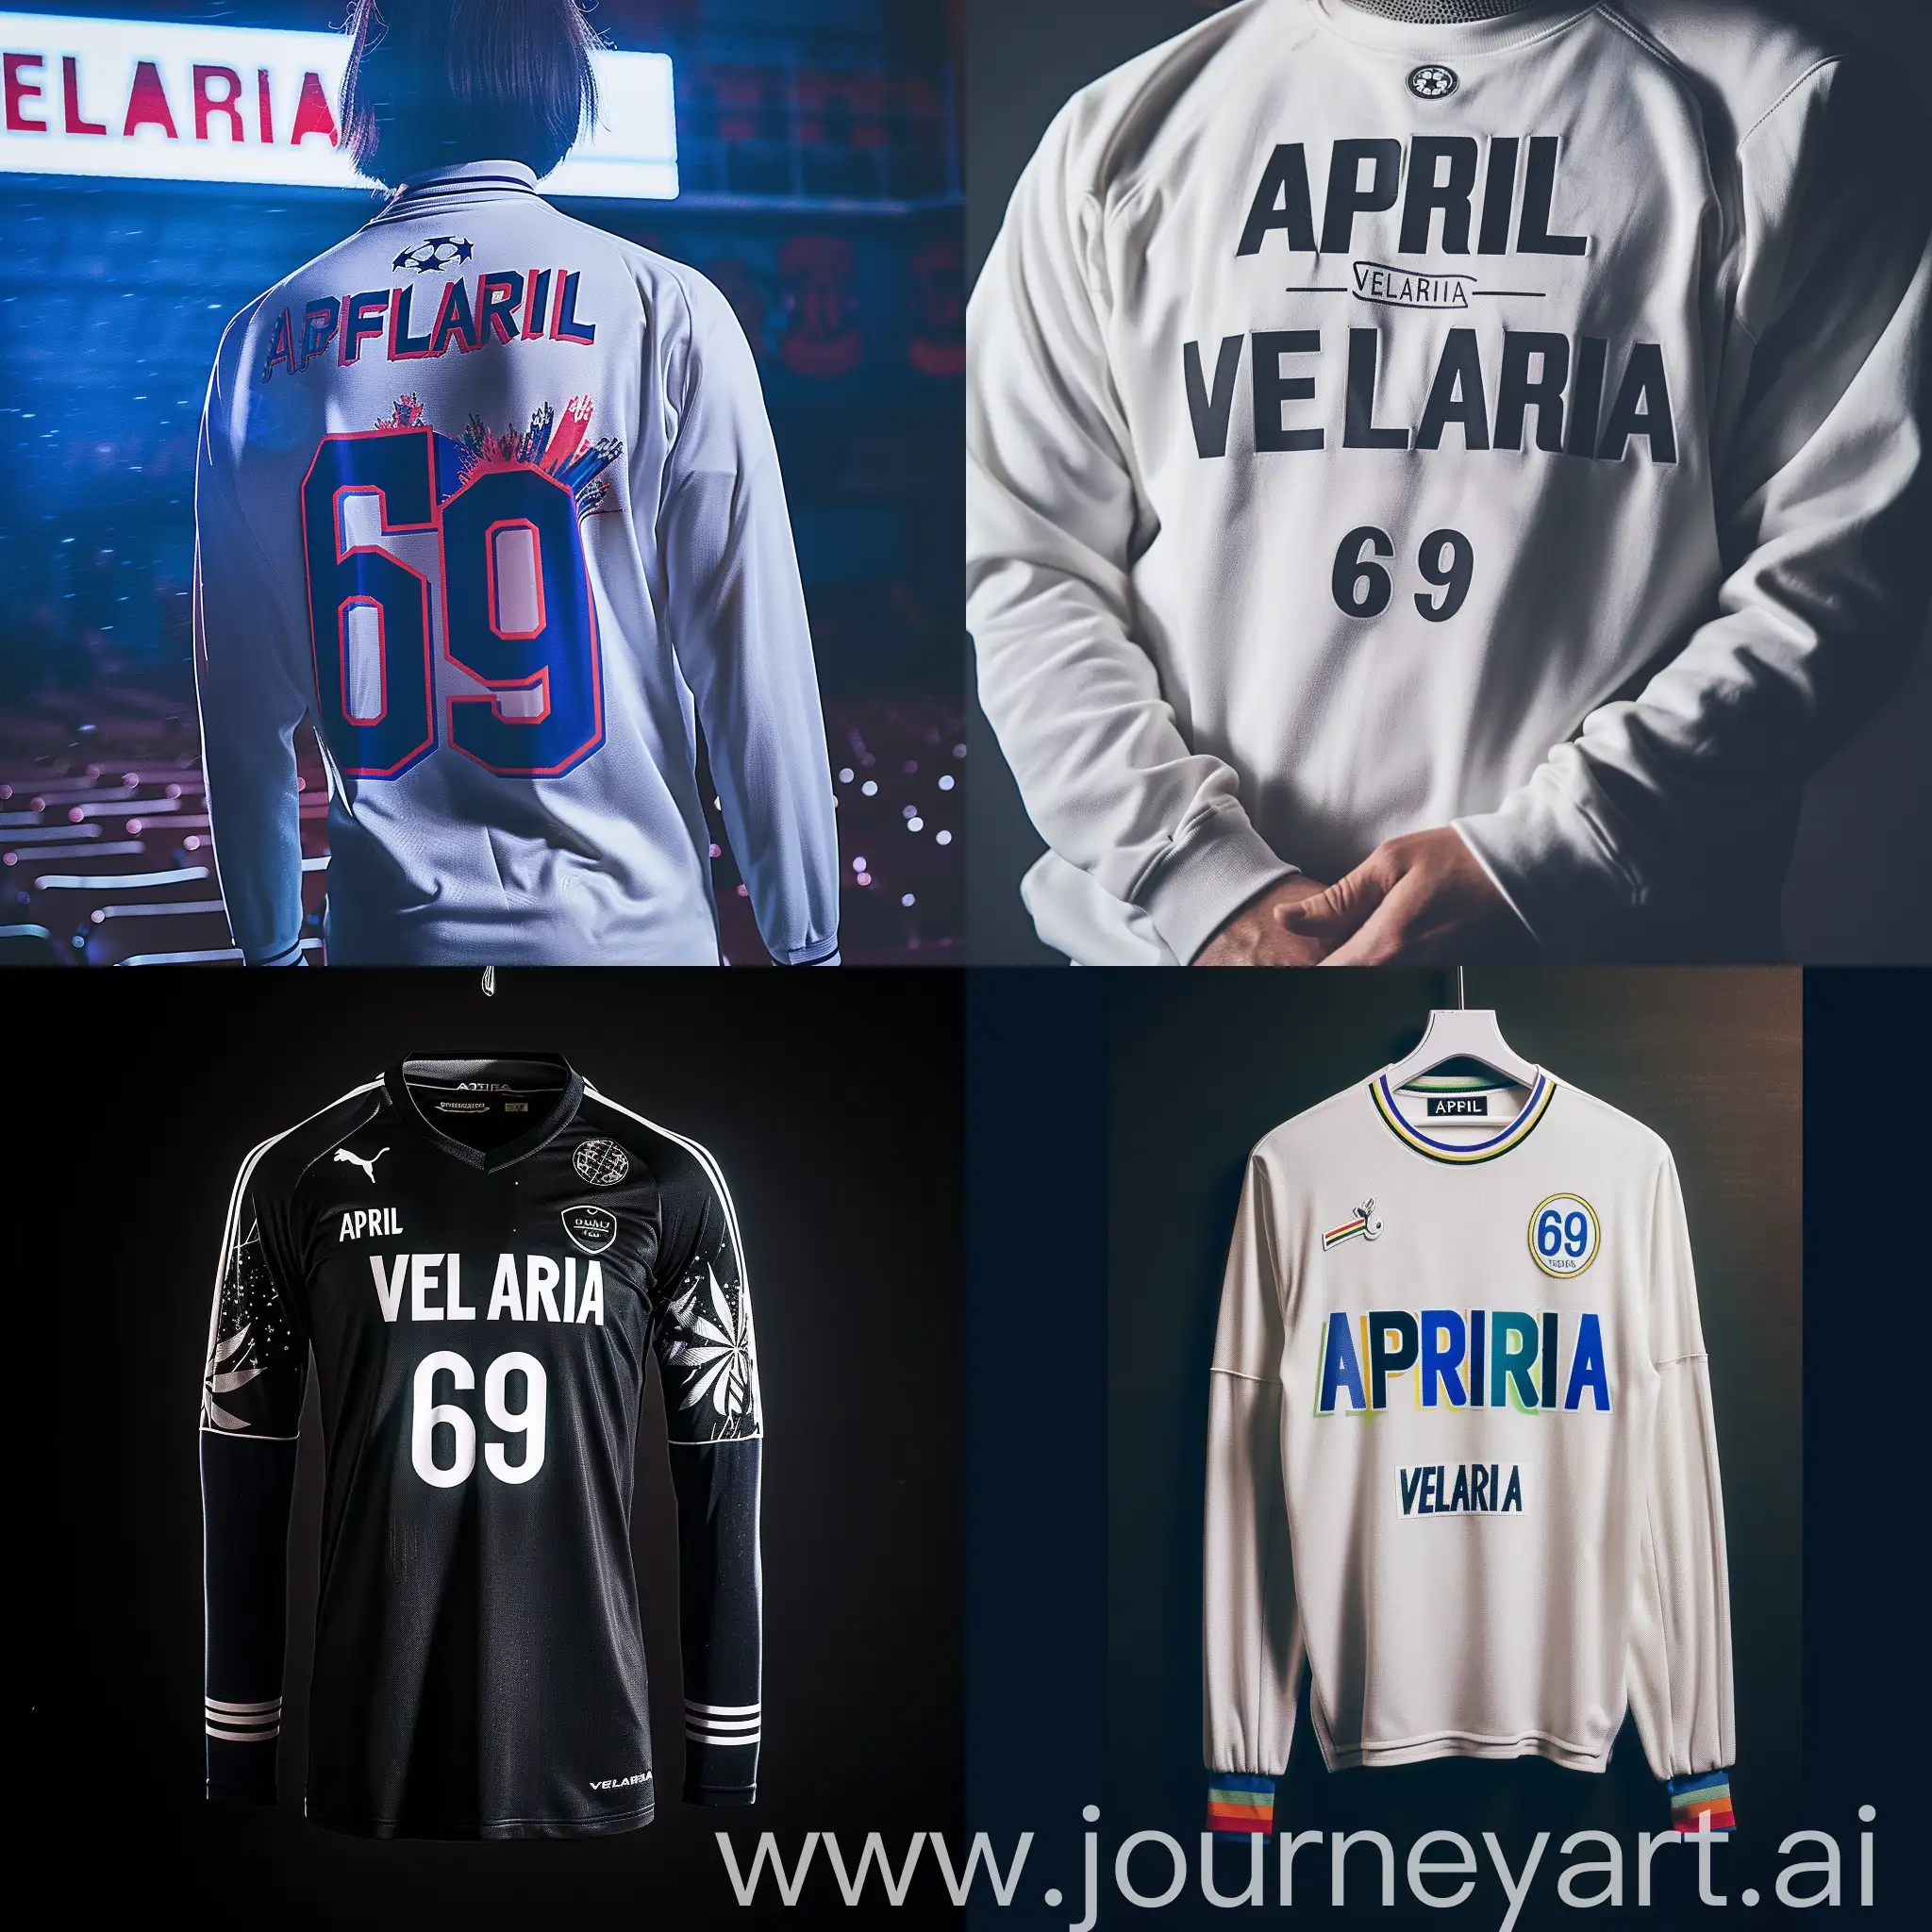  unique long sleeve jersey of a football team with logos of sponsors inspired by Maison Margiela with an “APRIL VELARIA” words in it and number 69 as a player team number 